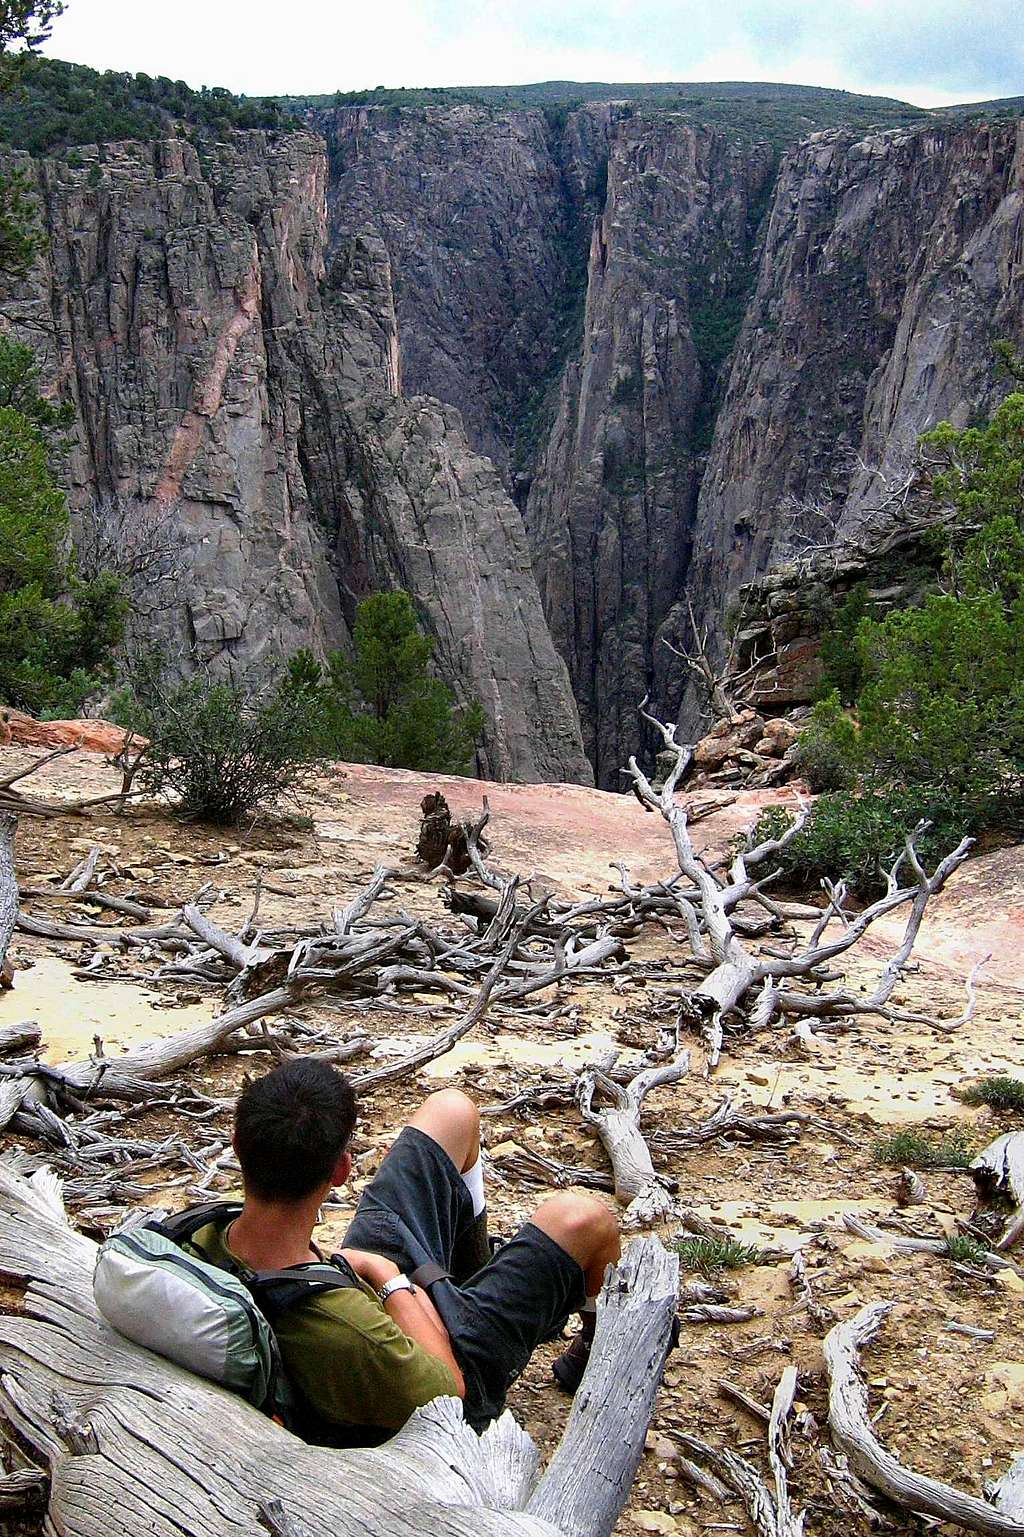 Waiting on the Old Man, Black Canyon of the Gunnison